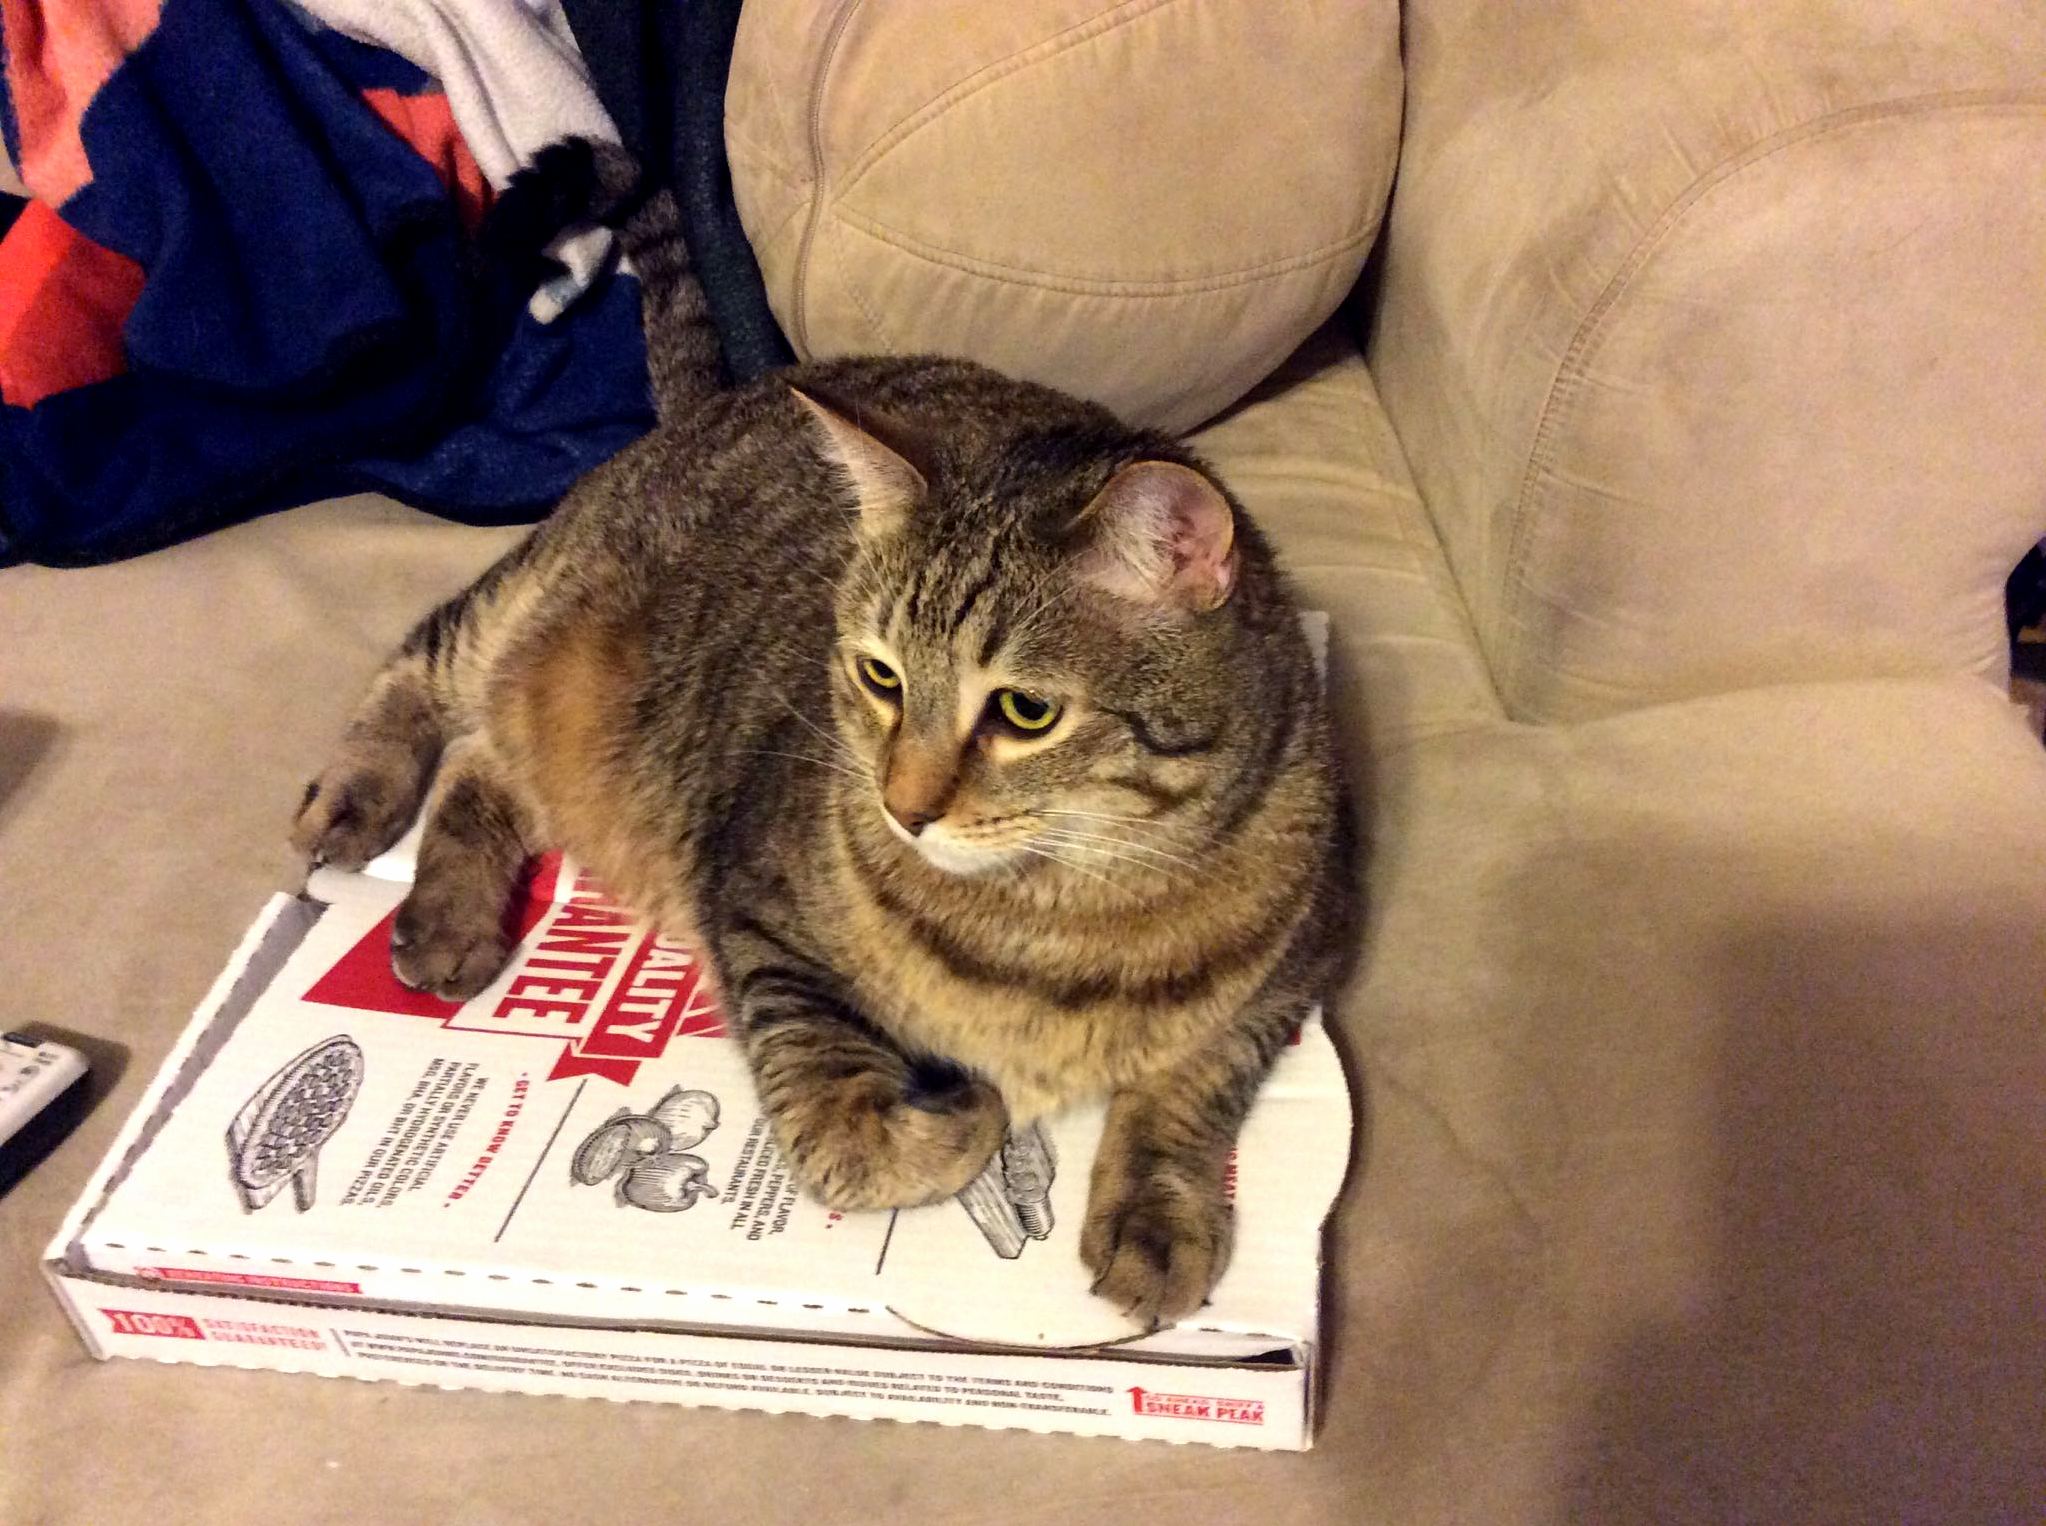 Cj guarding the pizza and keeping it safe.